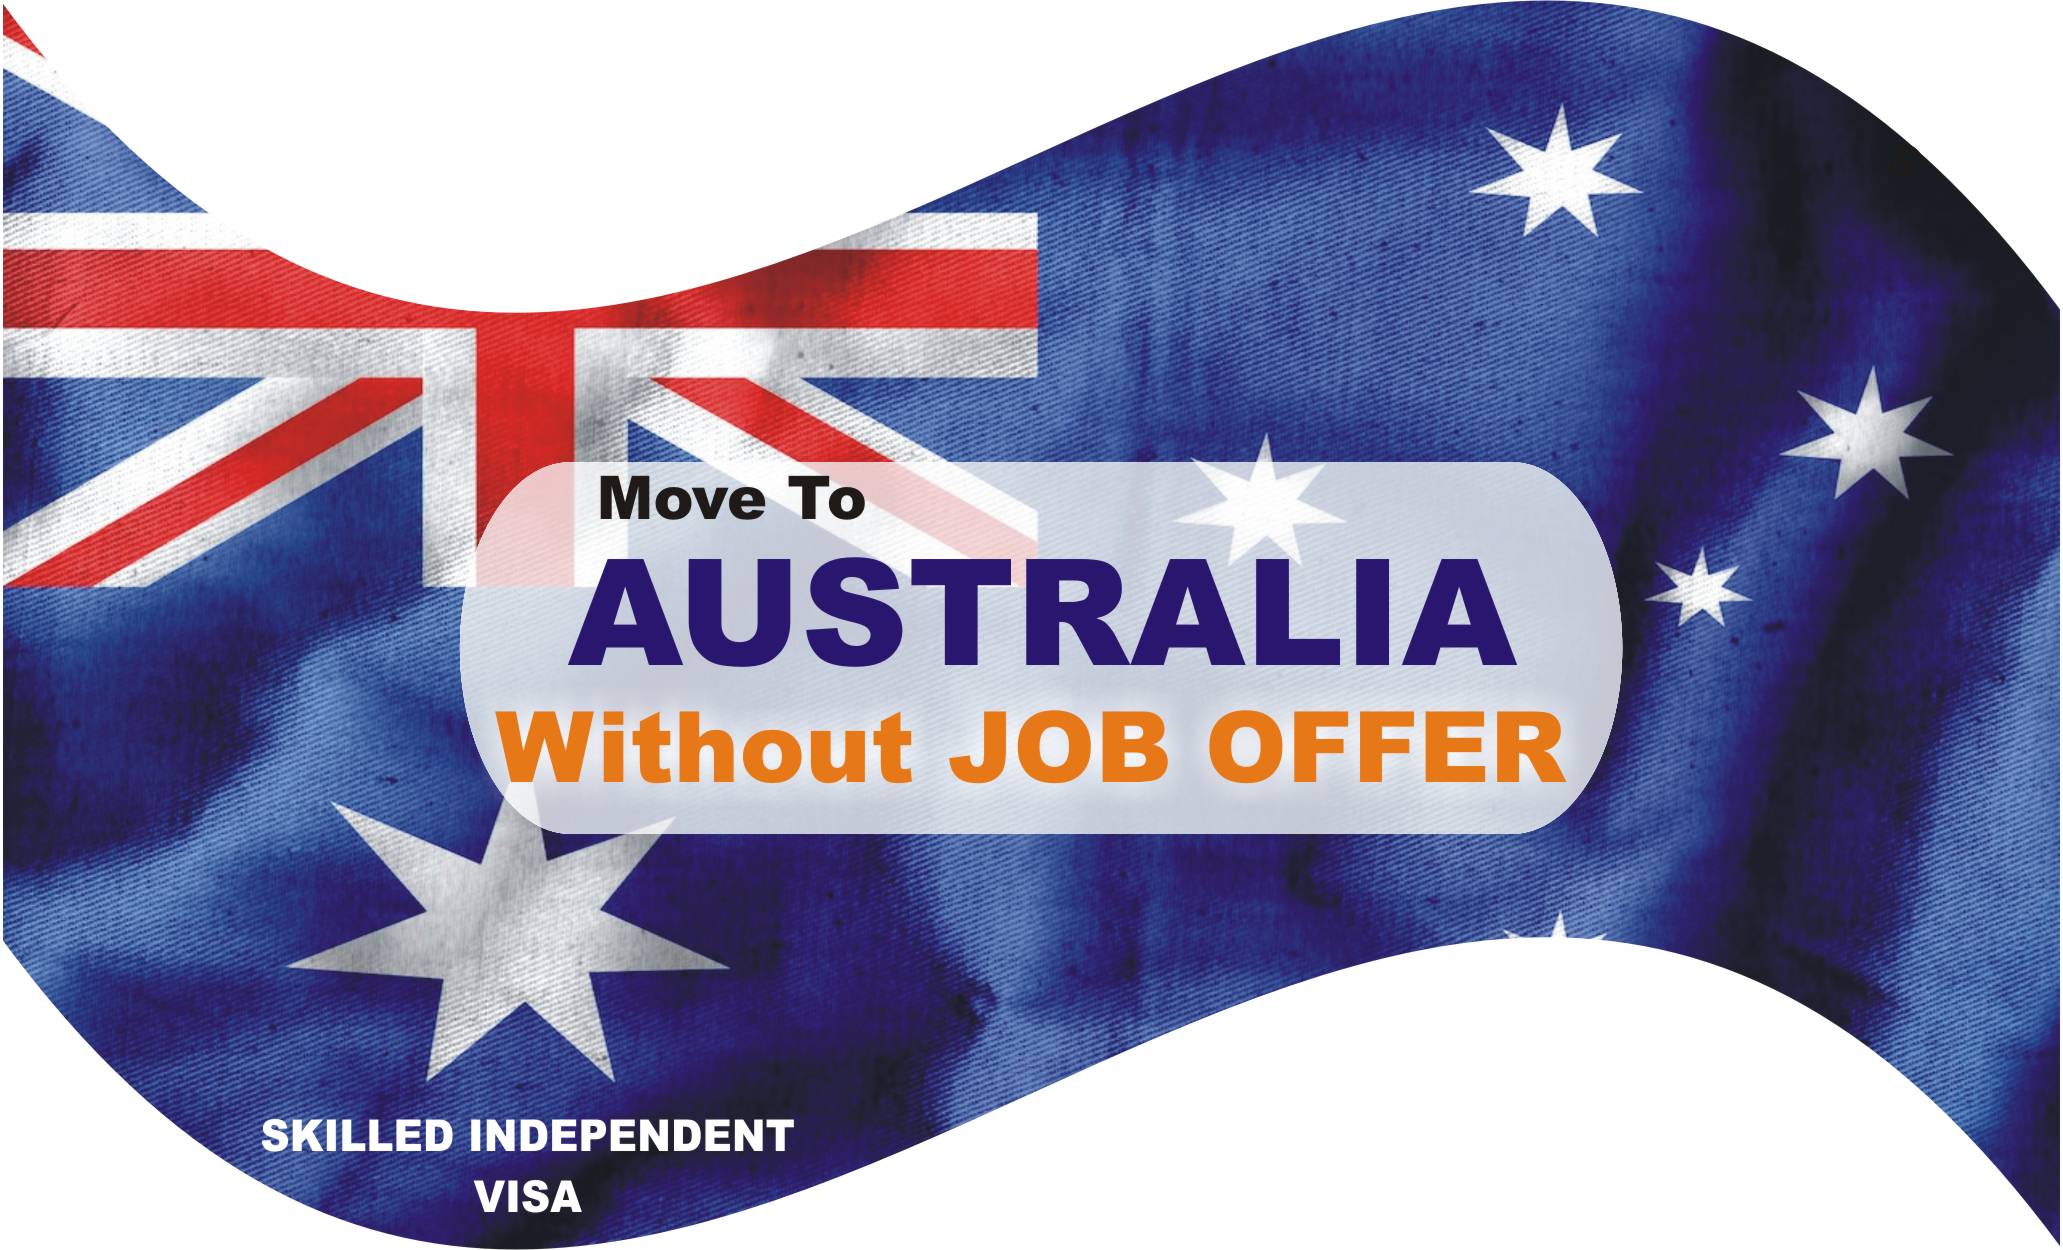 SKILLED INDEPENDENT VISA SUBCLASS 189